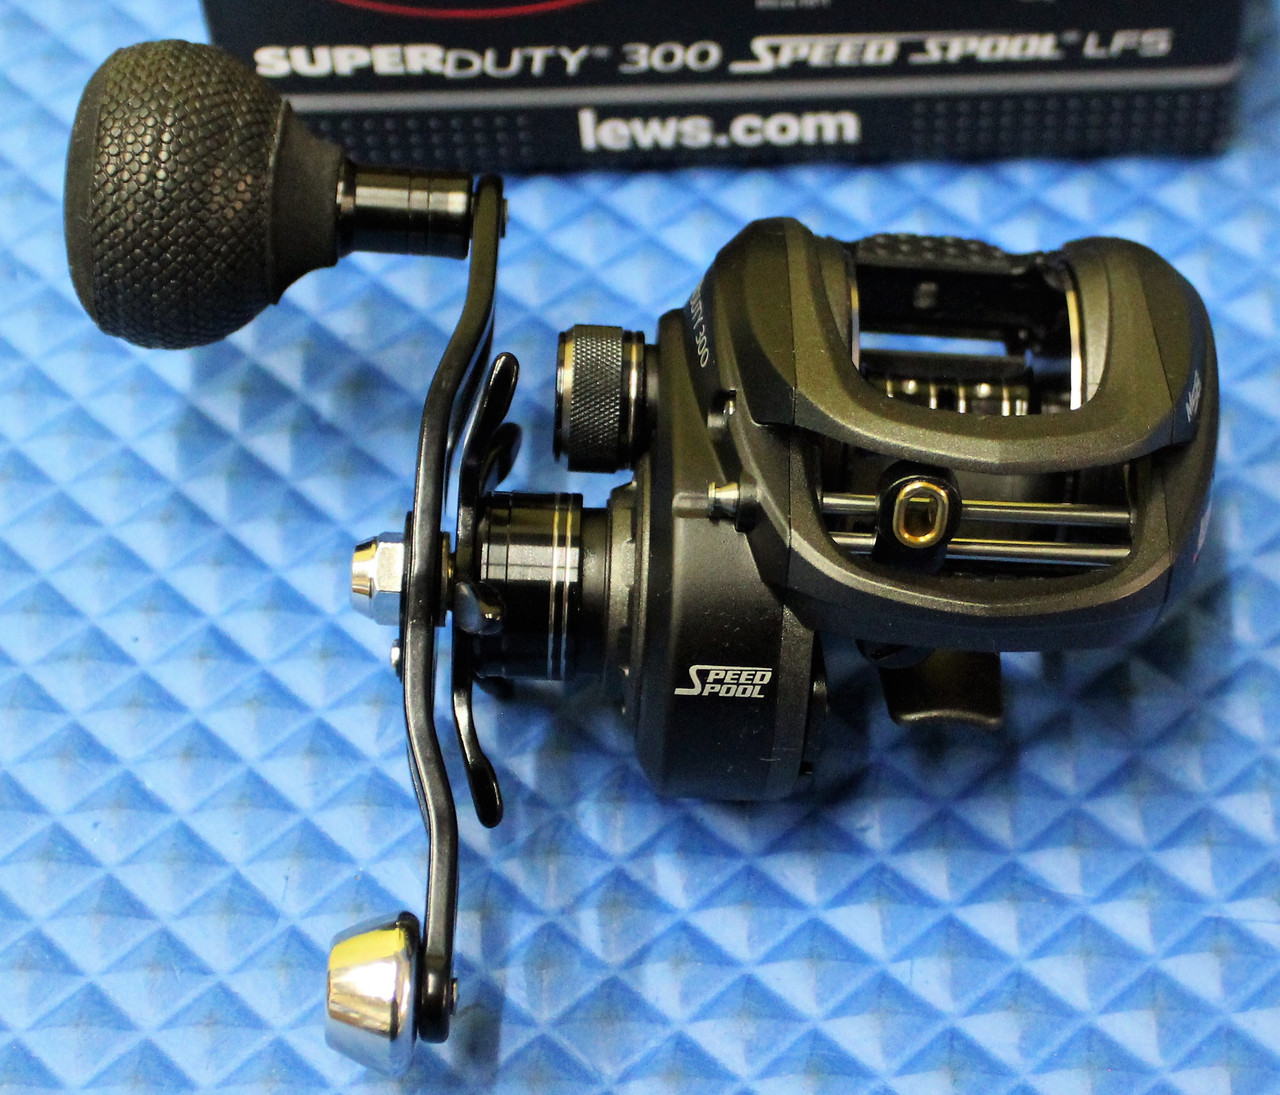 iCAST 2018- Lew's SUPER DUTY 300 bait caster reel with Lew's Super Duty  Custom Speed stick 